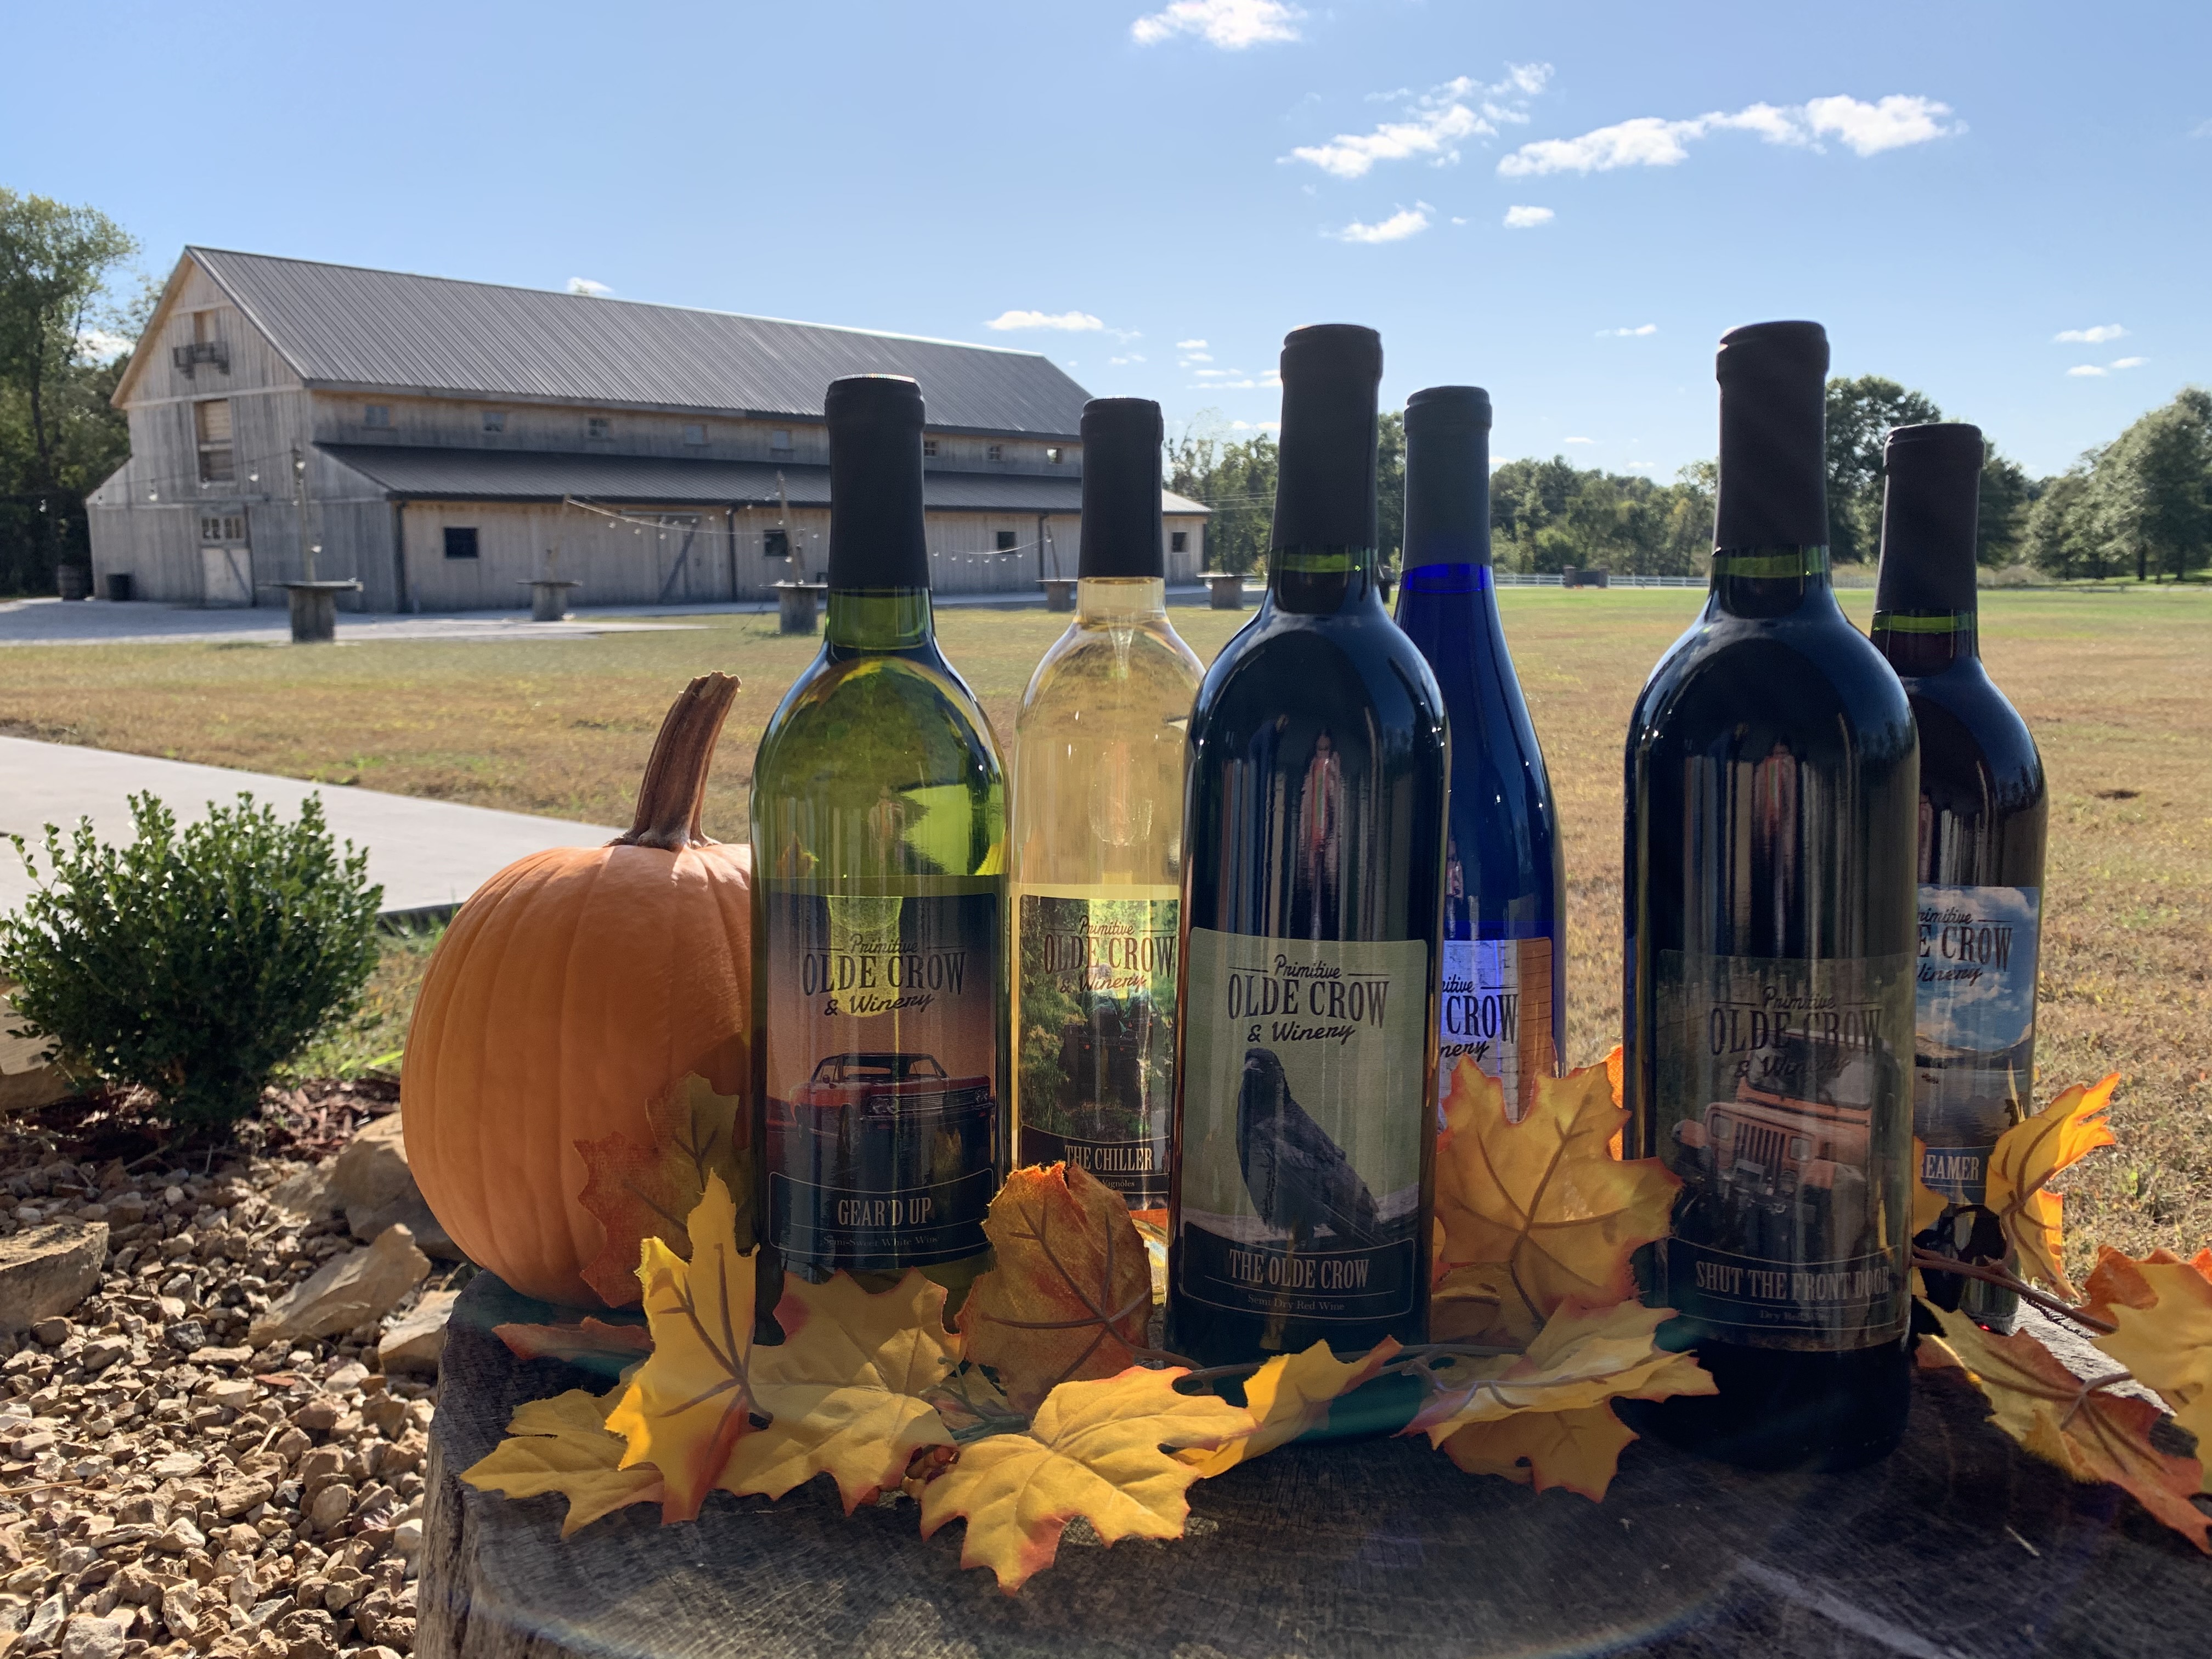 Primitive Olde Crow and Winery- Six bottles of wine outdoors on a table with fall leaves in front of the winery.